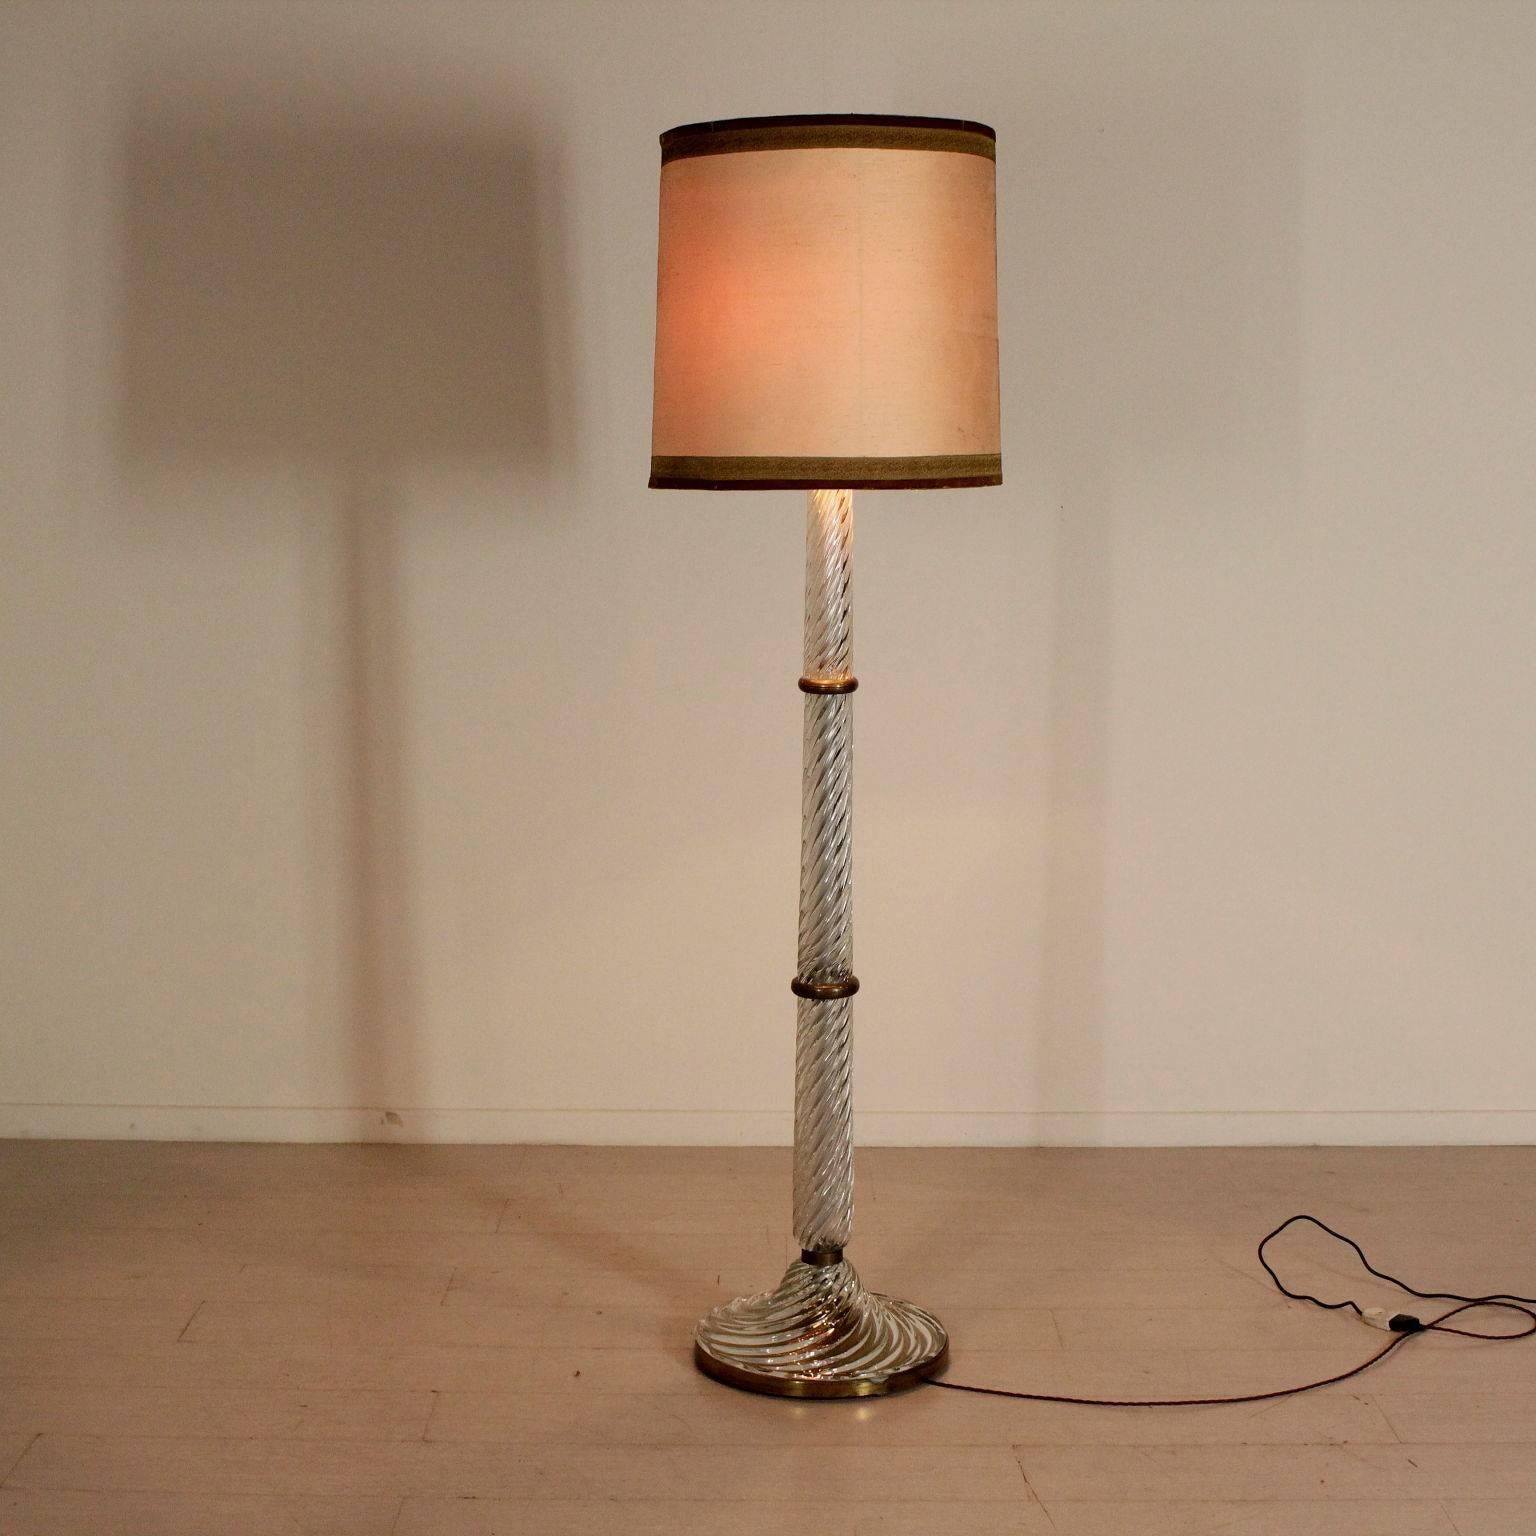 A floor lamp made of blown glass, brass, fabric lampshade. Manufactured in Italy, 1940s.